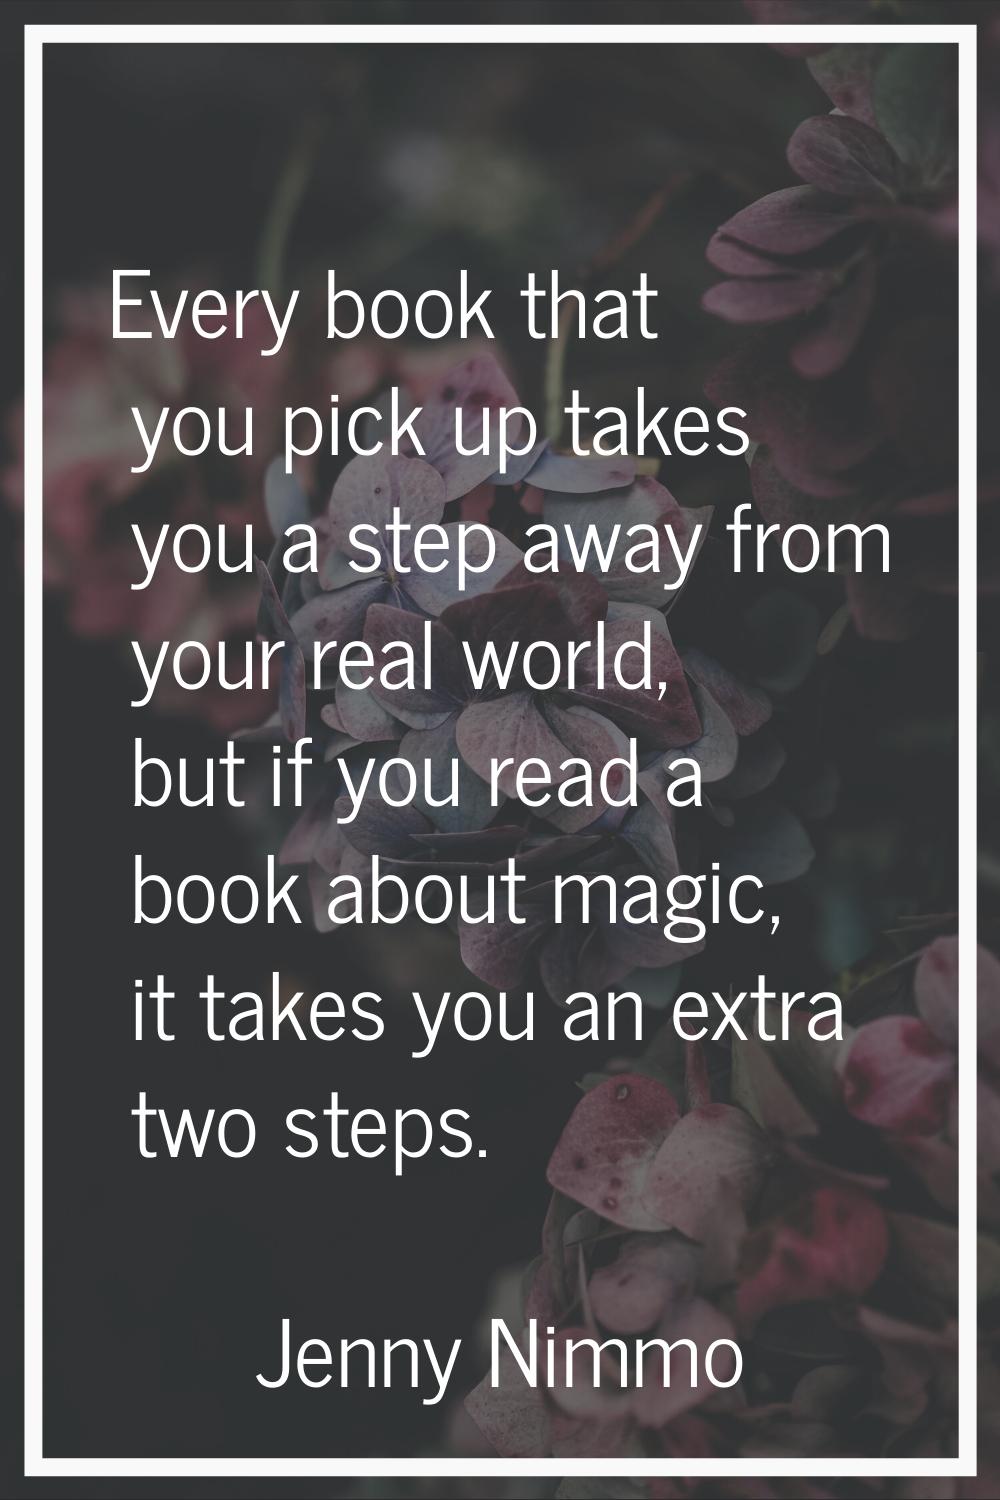 Every book that you pick up takes you a step away from your real world, but if you read a book abou